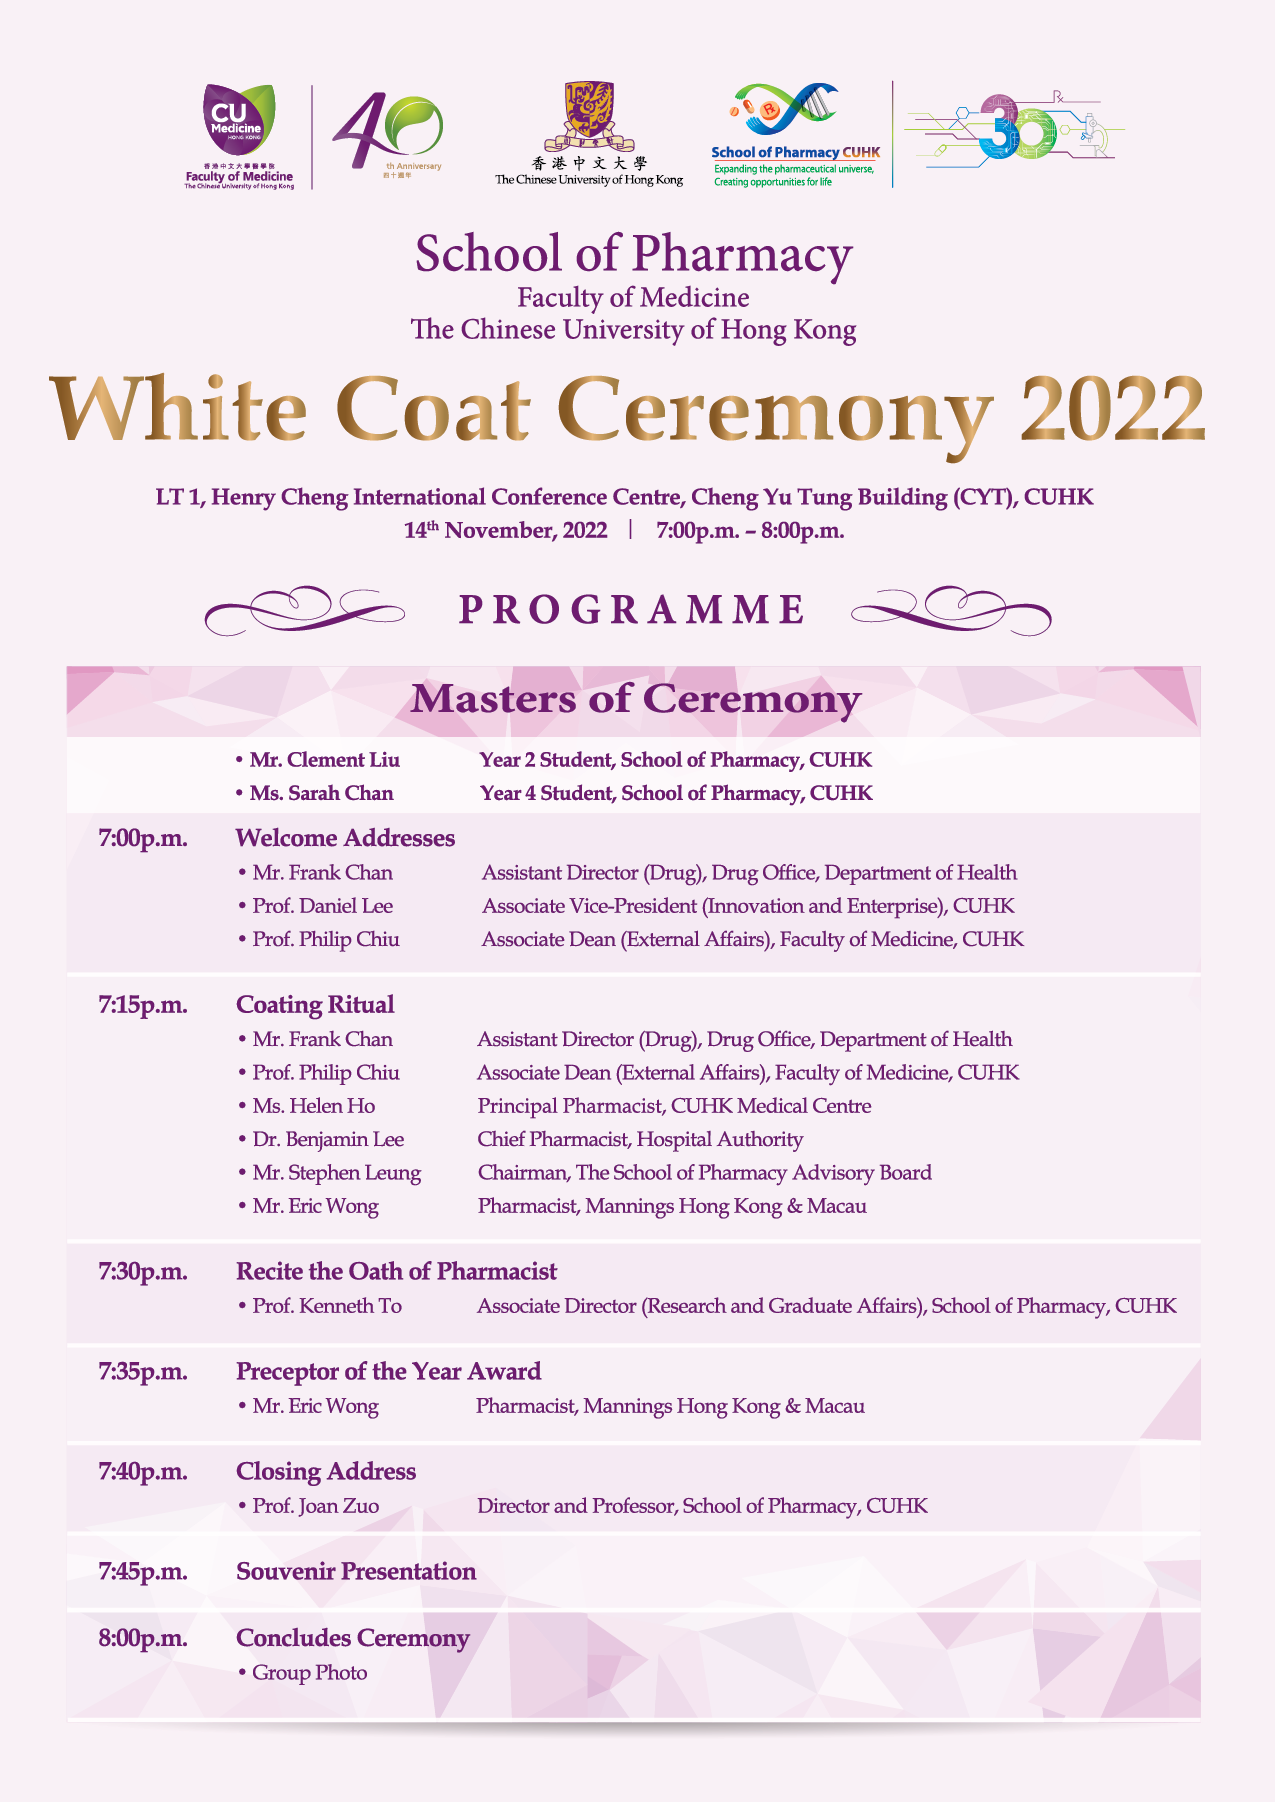 White Coat Ceremony 2022 @ LT 1, Henry Cheng International Conference Centre, Cheng Yu Tung Building (CYT), The Chinese University of Hong Kong (University Exit B)